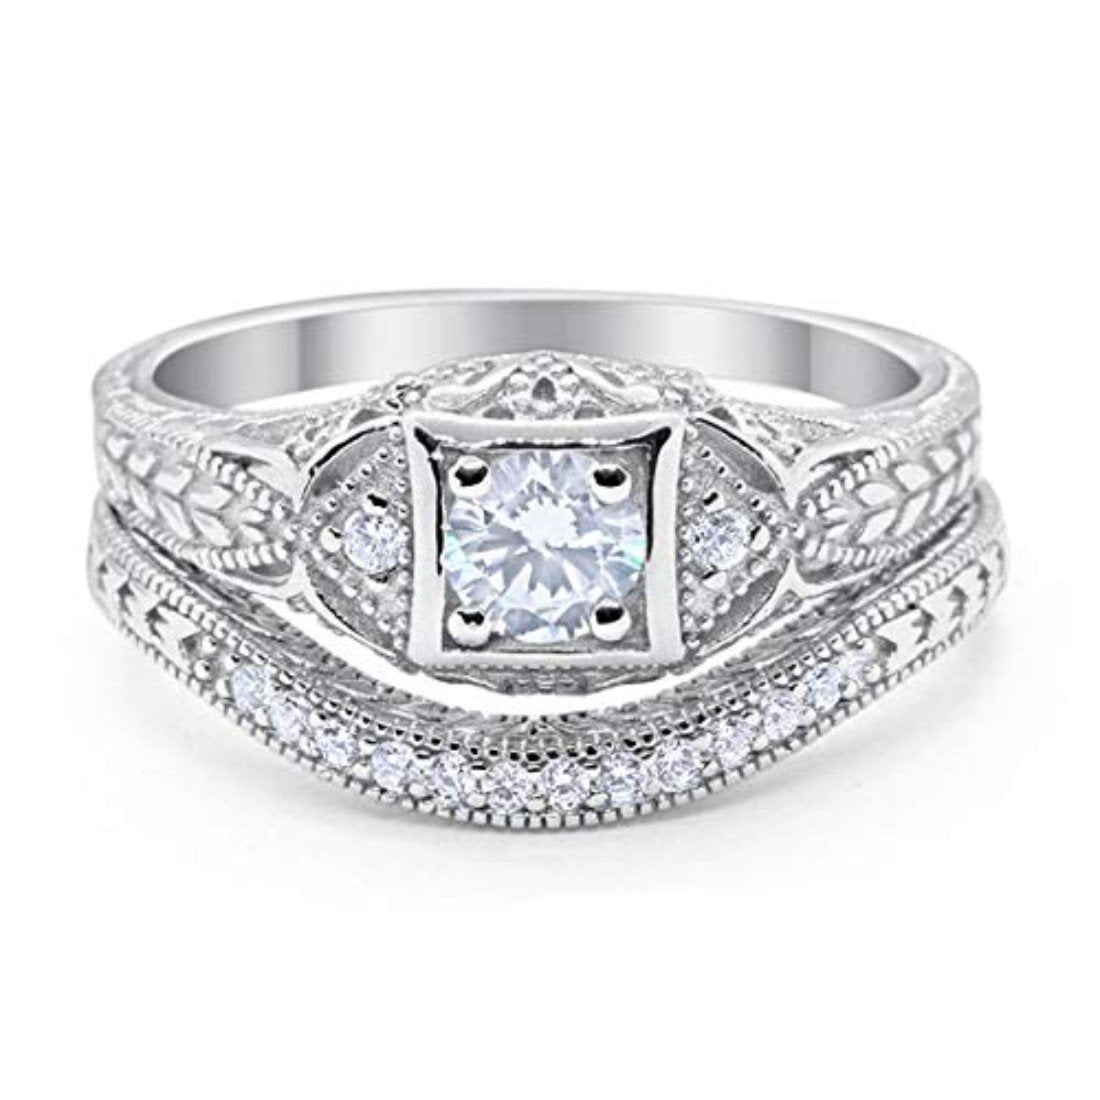 Vintage Style Two Piece Wedding Ring Bridal Simulated CZ 925 Sterling Silver